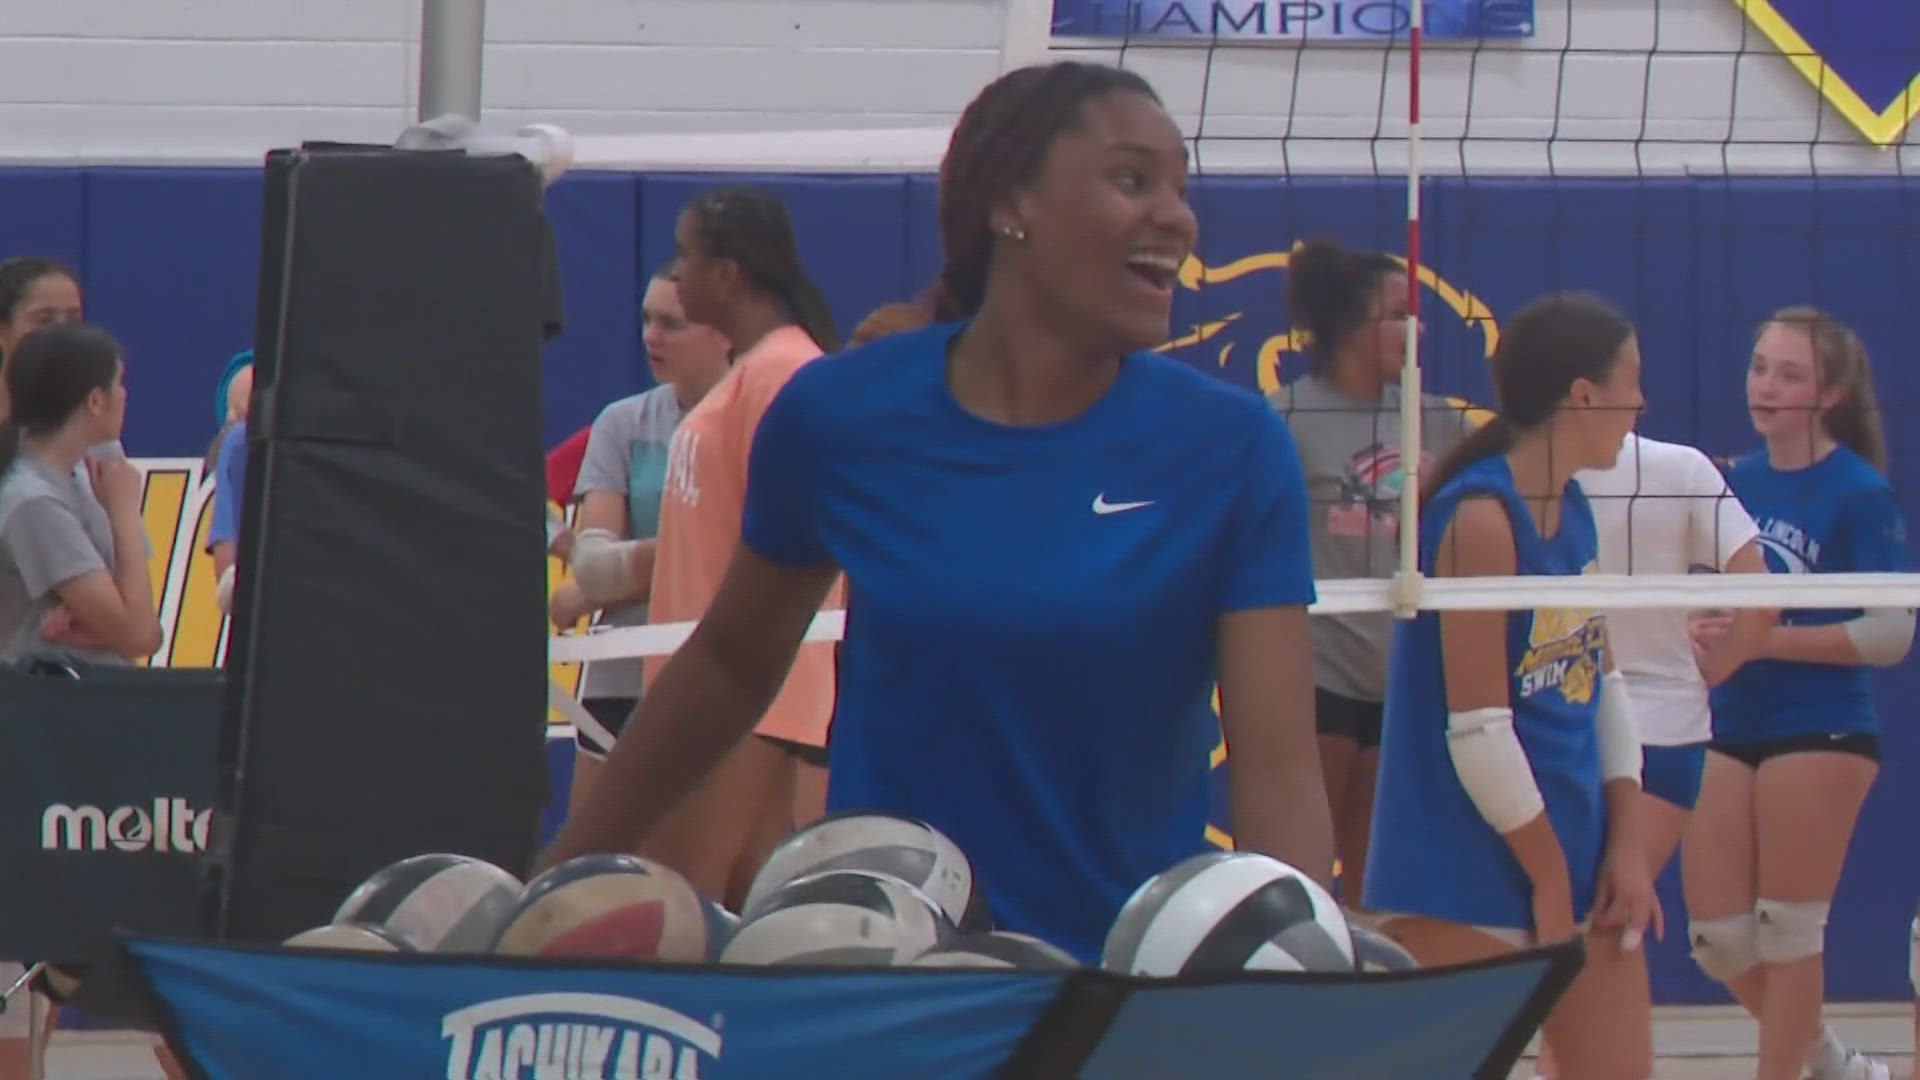 Gahanna Lincoln volleyball player Gabrielle Dials is this week's 10TV Athlete of the Week.